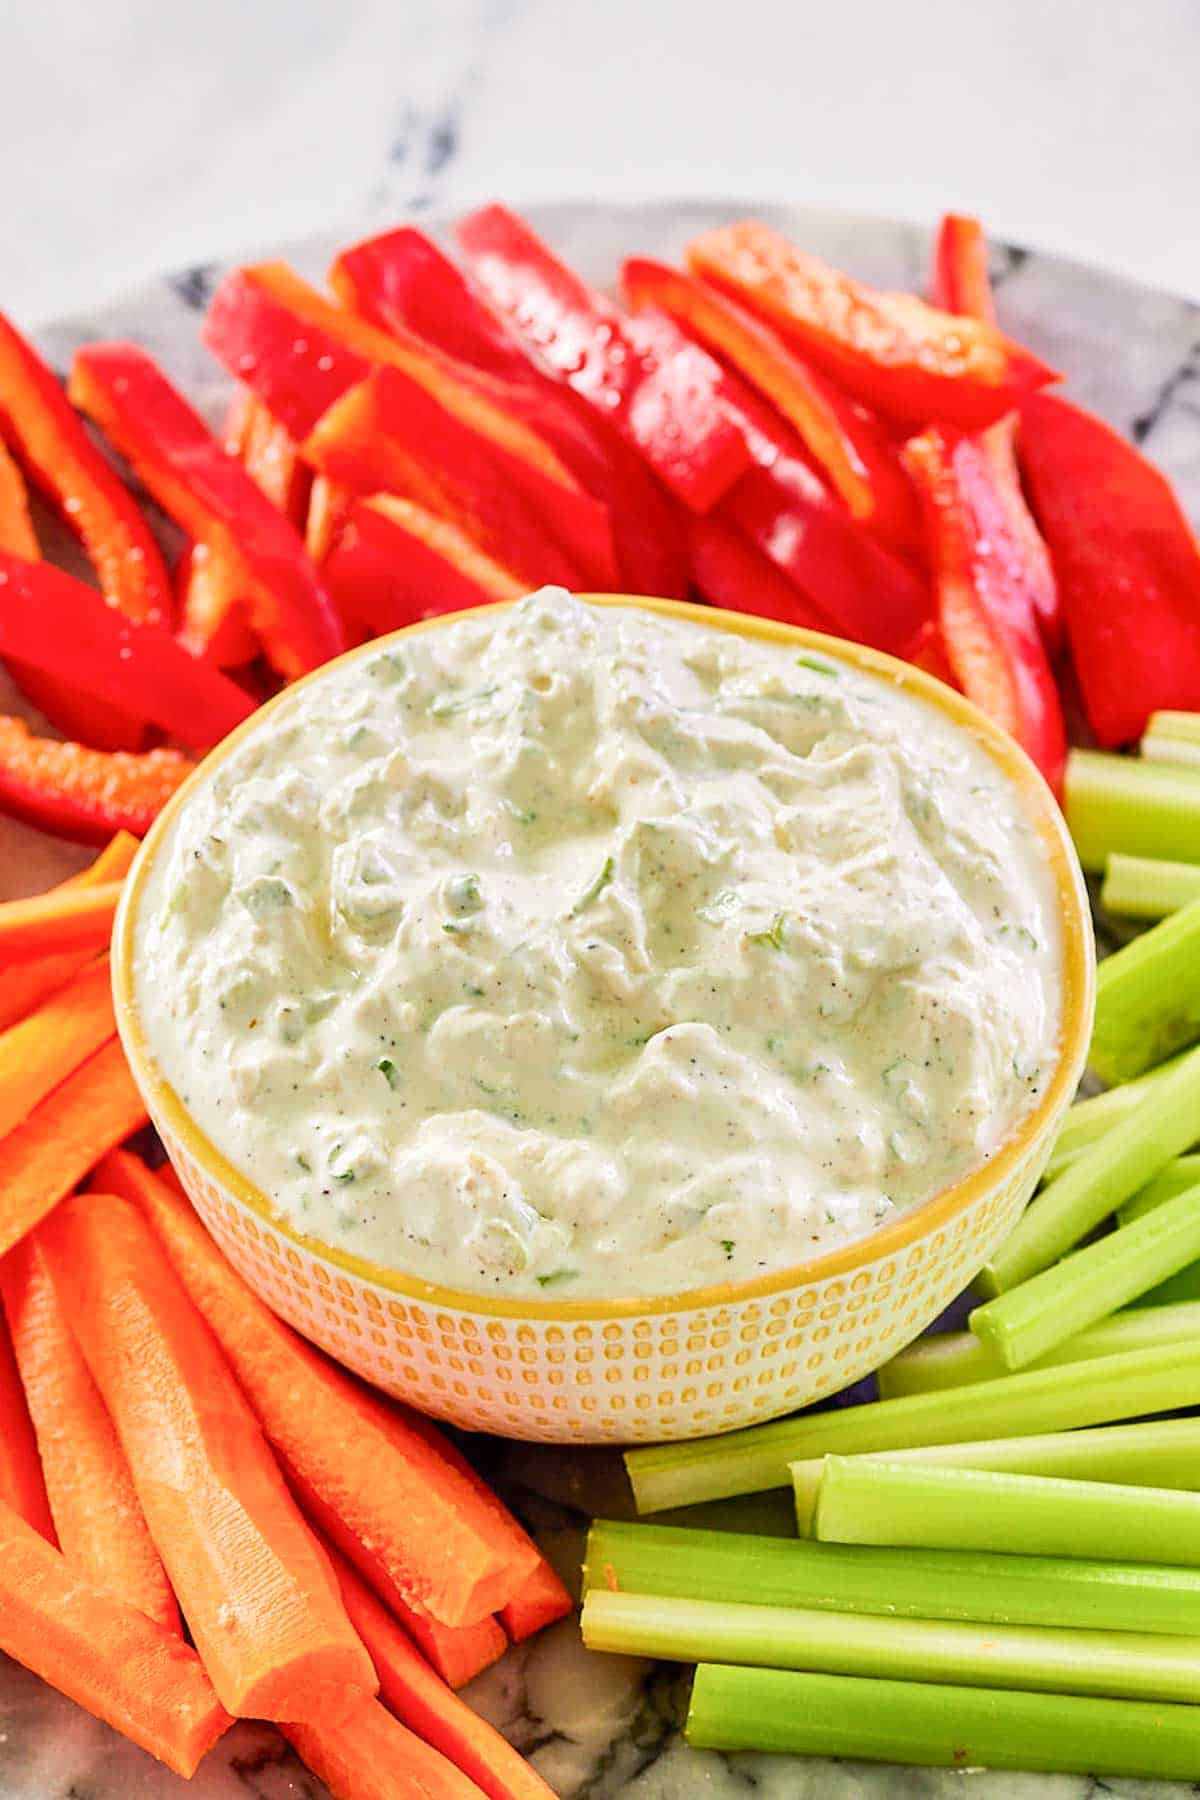 Homemade green onion dip and fresh vegetables on a platter.